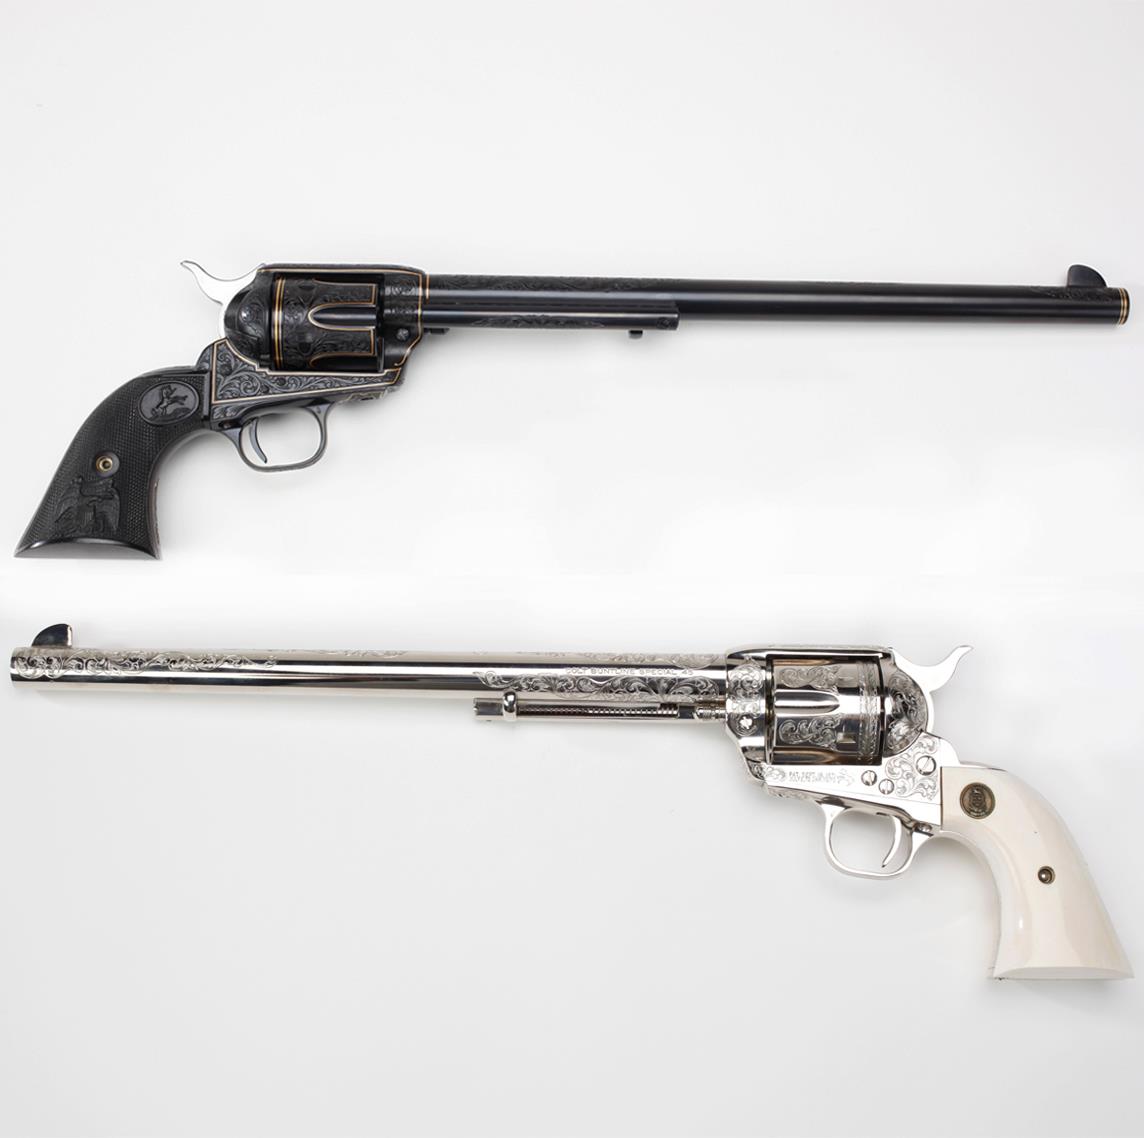 Gun of the Day: Buntline Colts